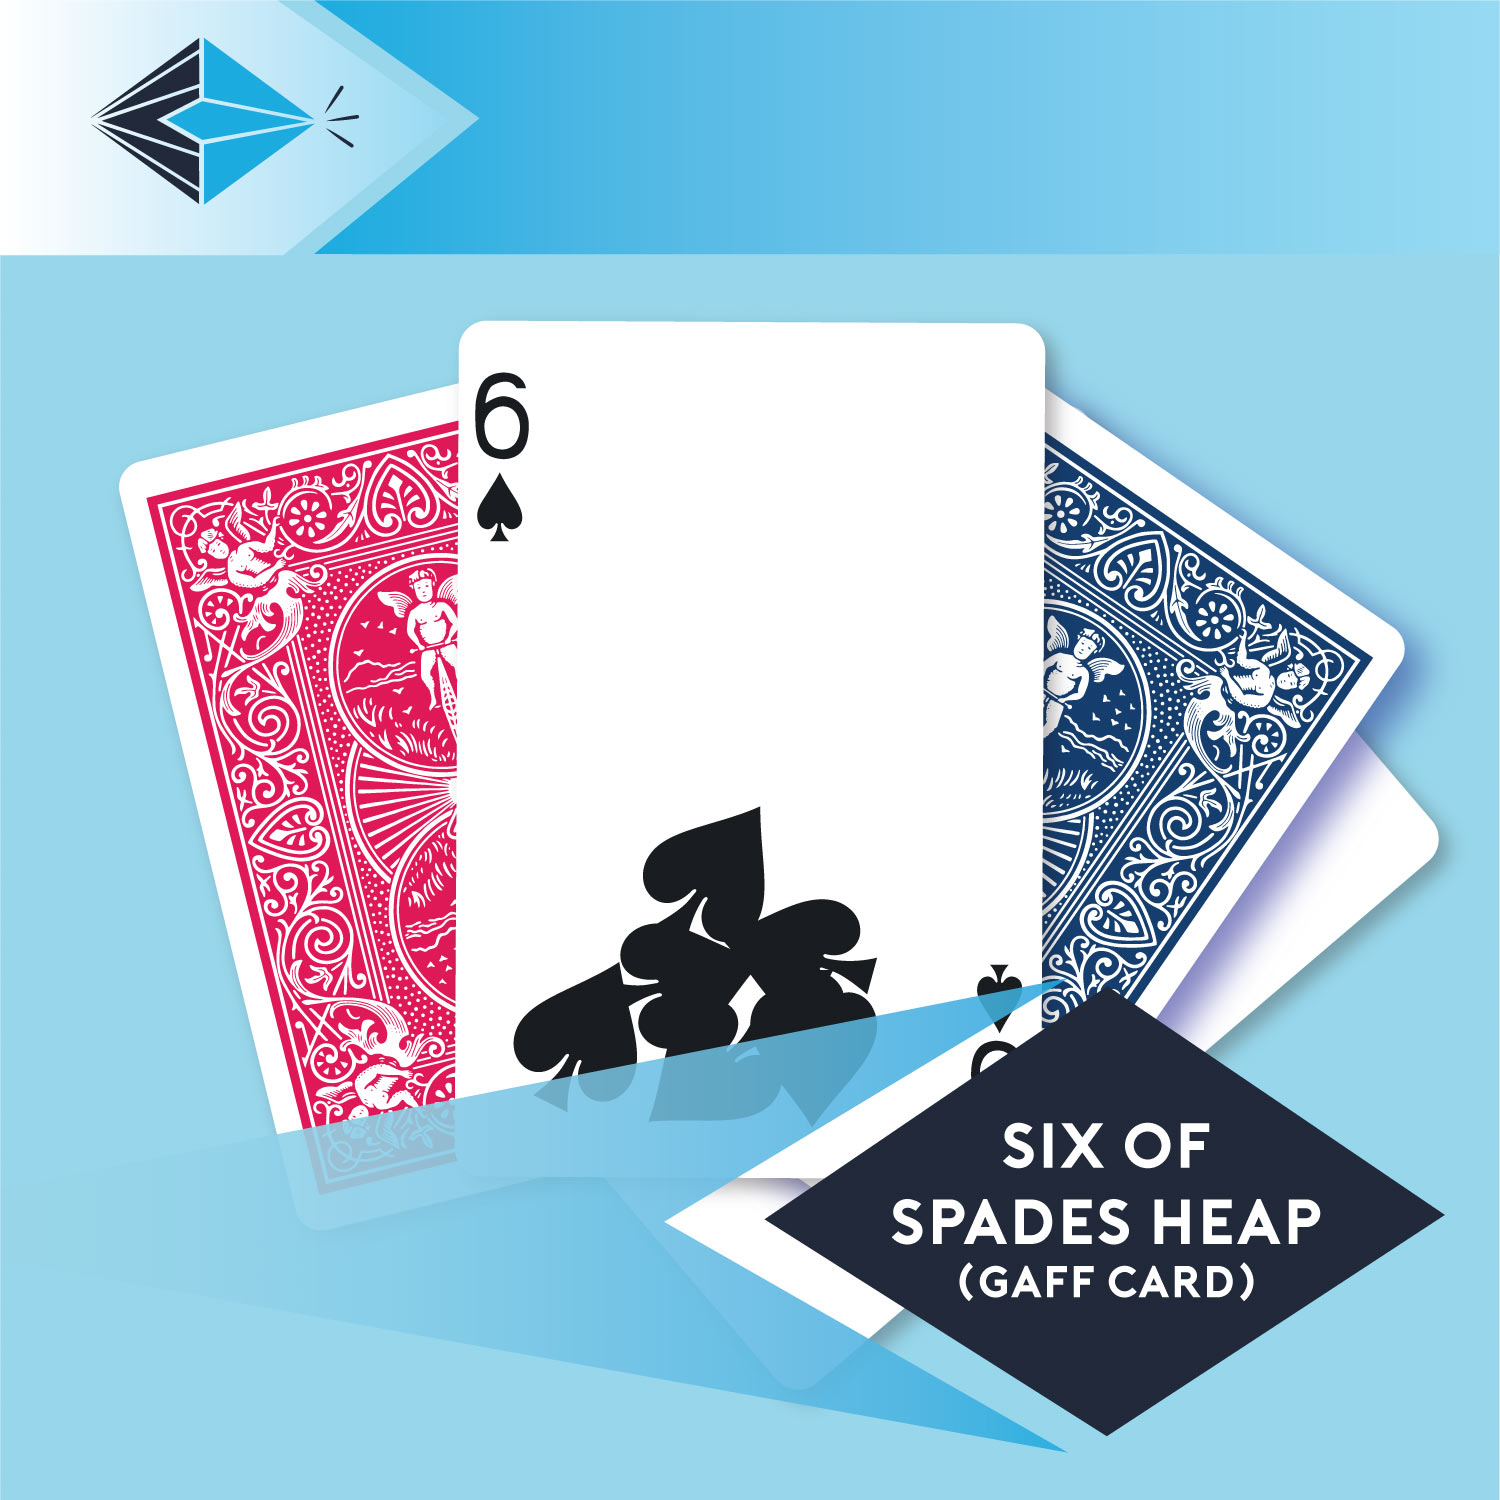 six of spades heap gaff card 15 playing card for magicians printing printers Stockport Manchester UK